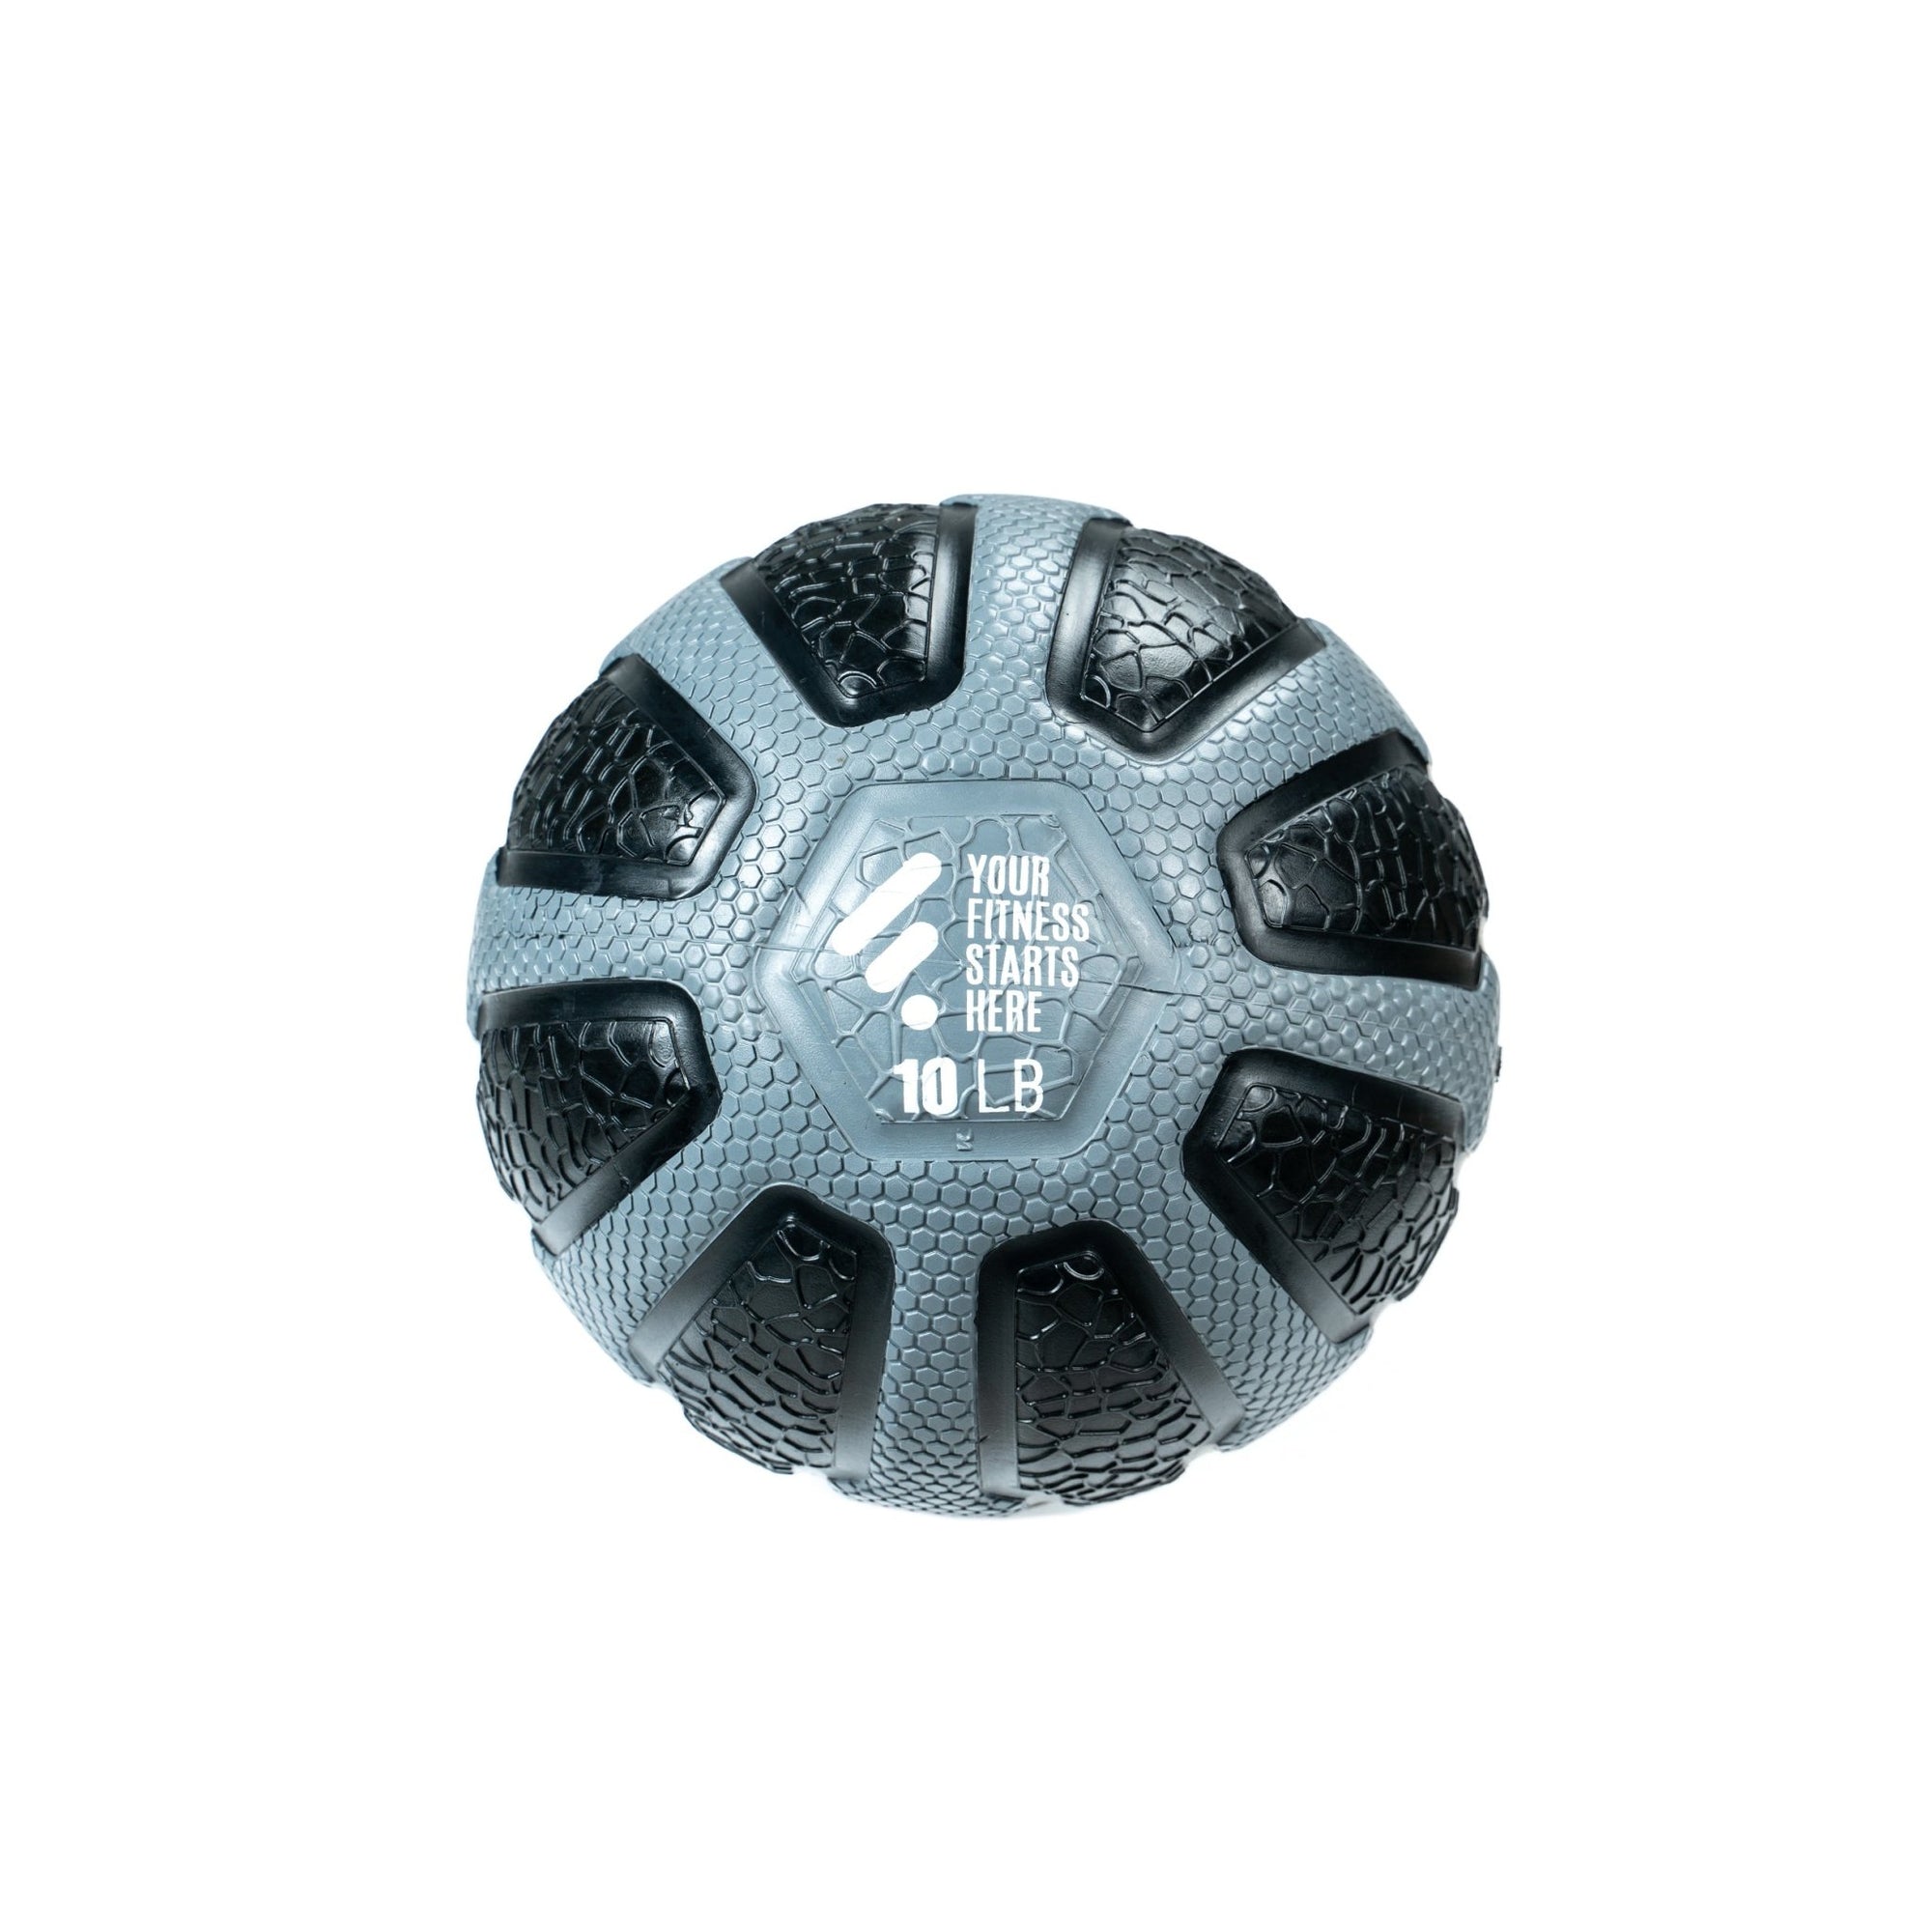 FitWay Equip. Max Grip Medicine Ball - 10 Lbs - Fitness Experience